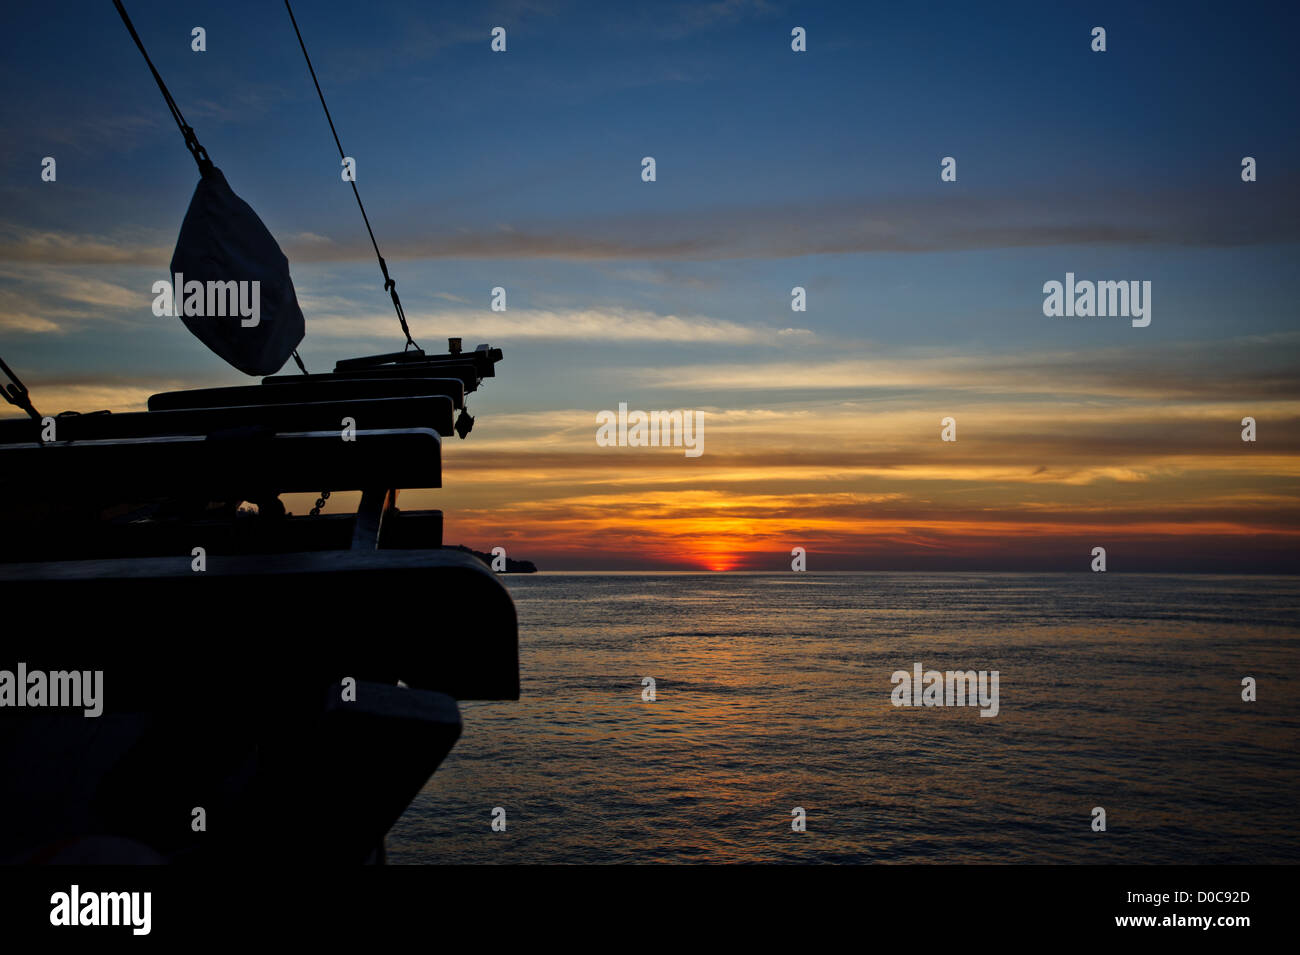 A sunset taken from the Samata Luxury Yacht while in Komodo National Park Stock Photo